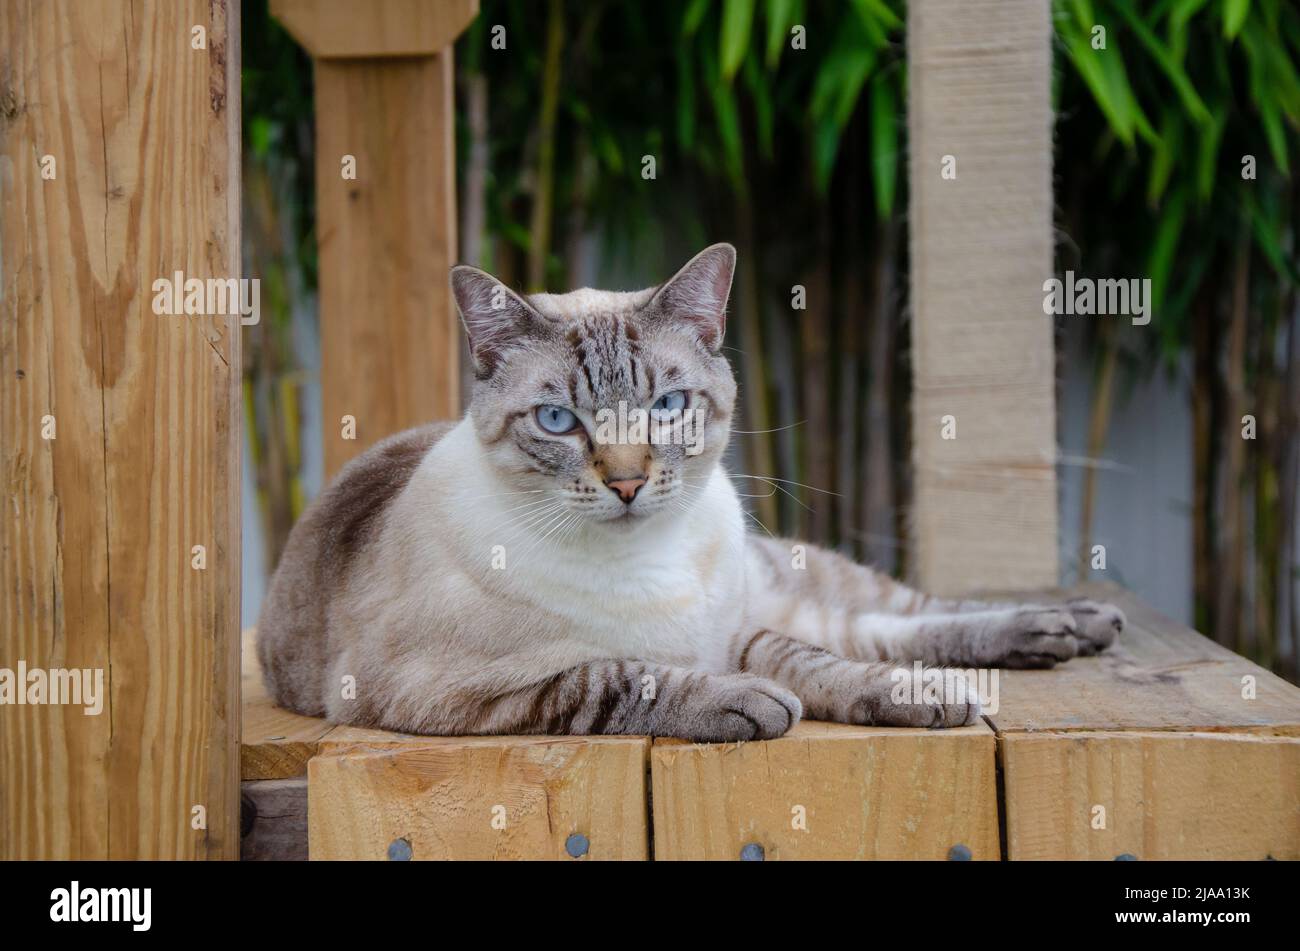 chubby cat, siamese with blue eyes, outside, laying on wood platform, bamboo in background, day, eye level Stock Photo